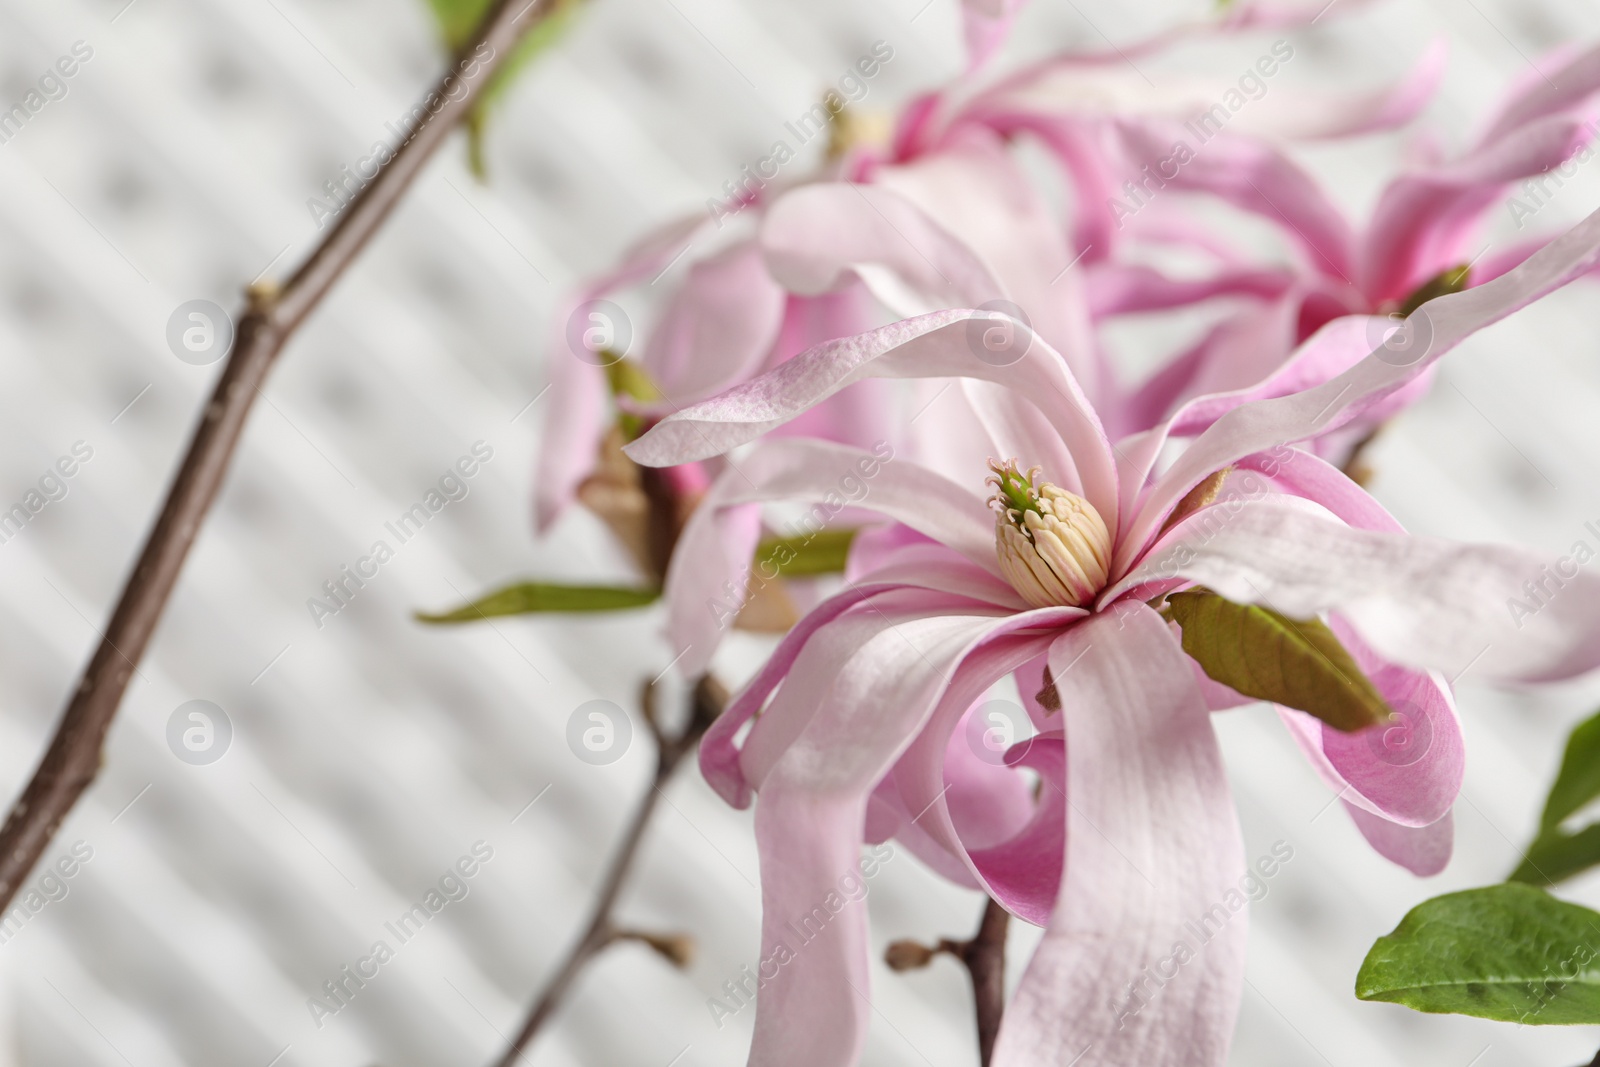 Photo of Magnolia tree branches with beautiful flowers on white background, closeup